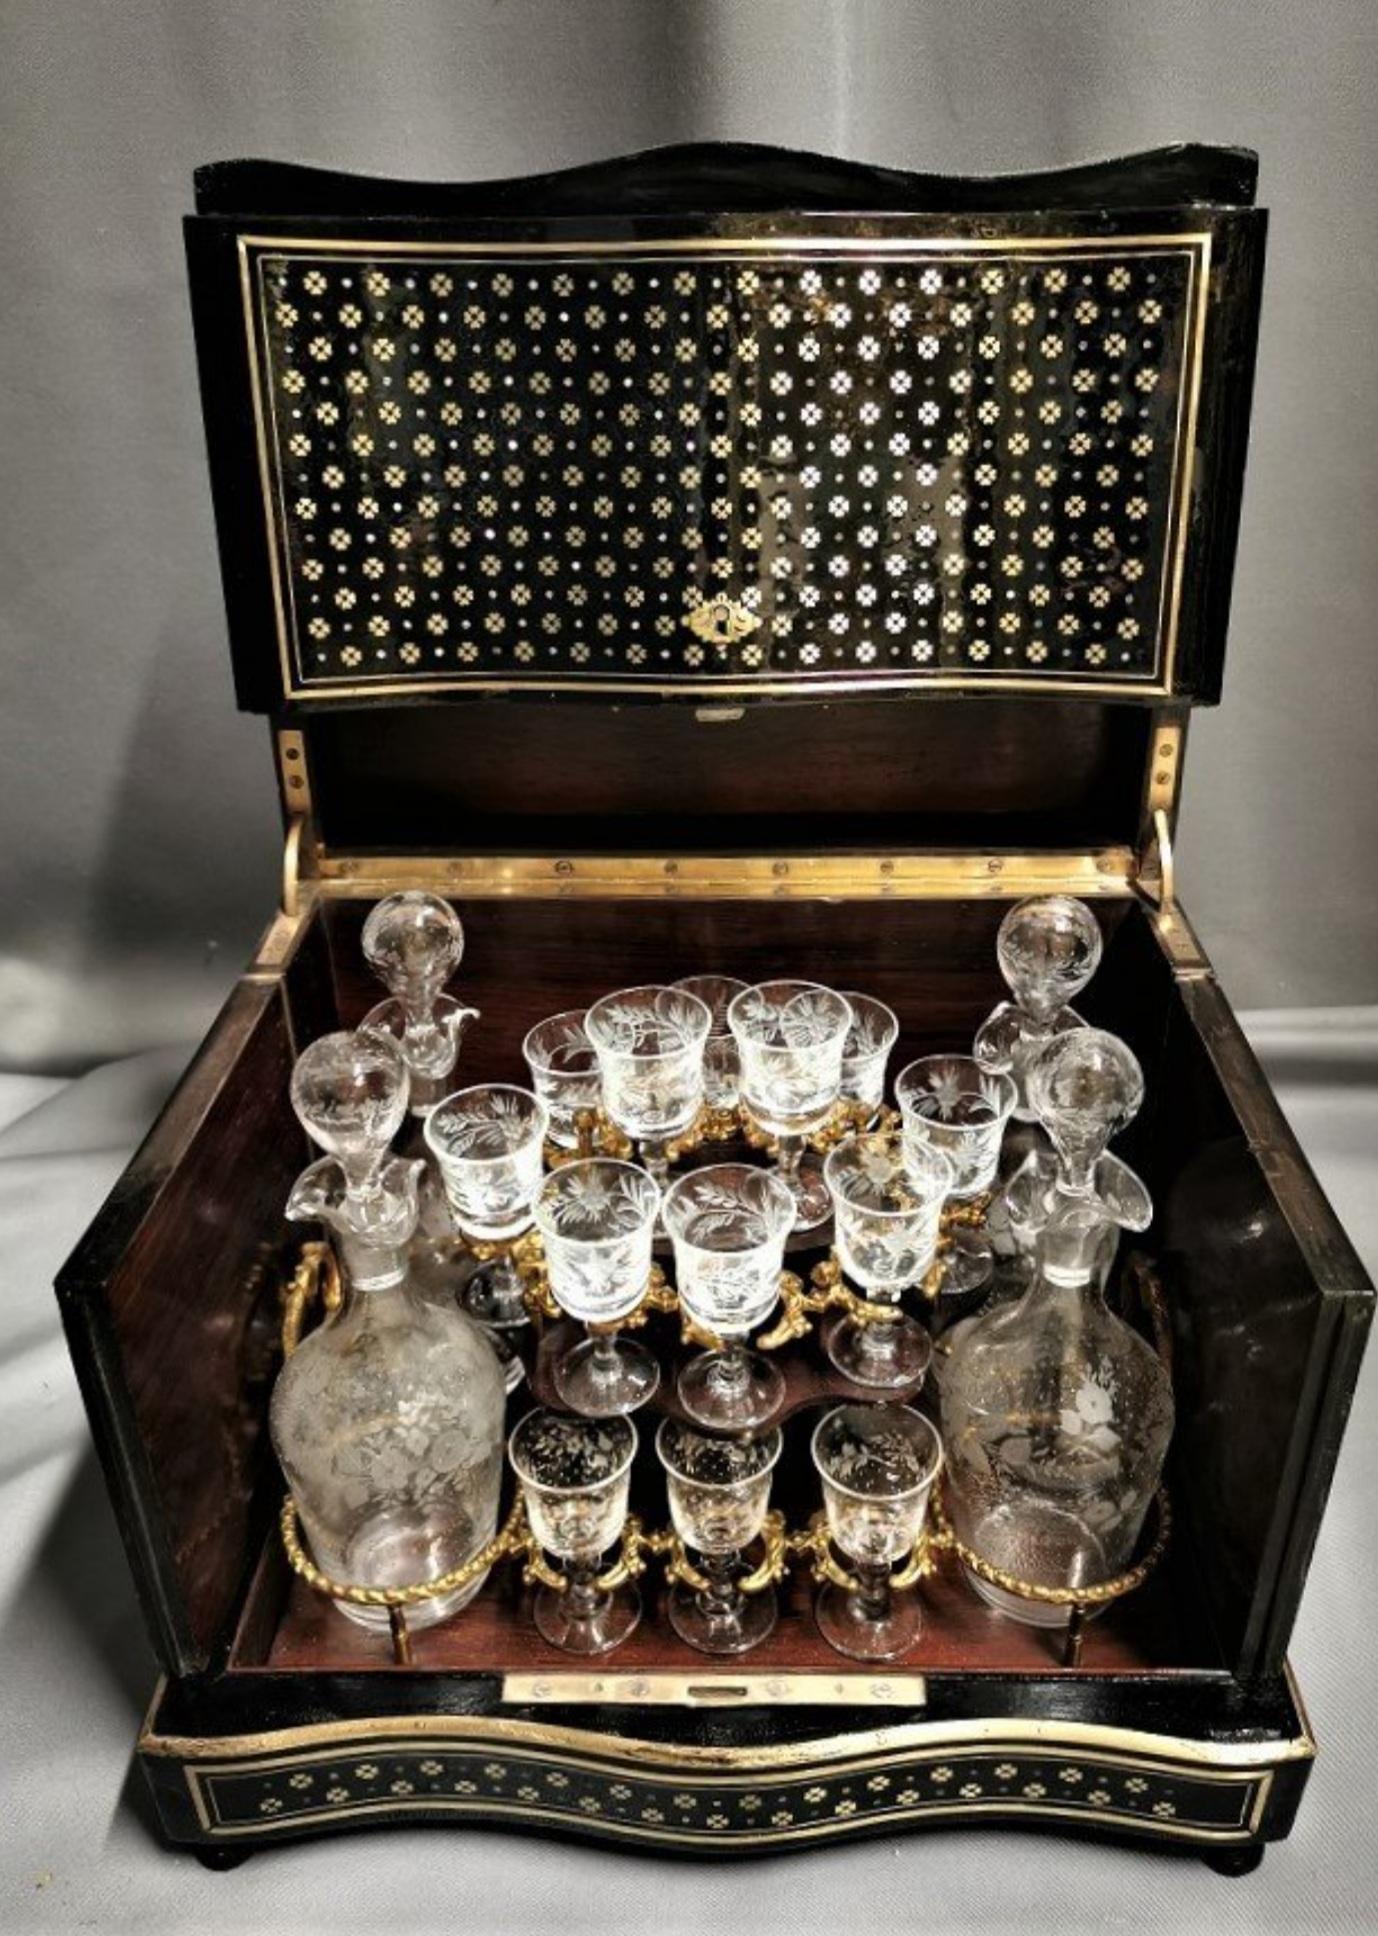 Napoleon III Liquor cellar in Boulle marquetry, beautifully made up by interlacing geometric patterns in the shape of brass quartefeuilles and embedded mother of pearl points, on the hood and the front.
Interior with a removable servant garnished